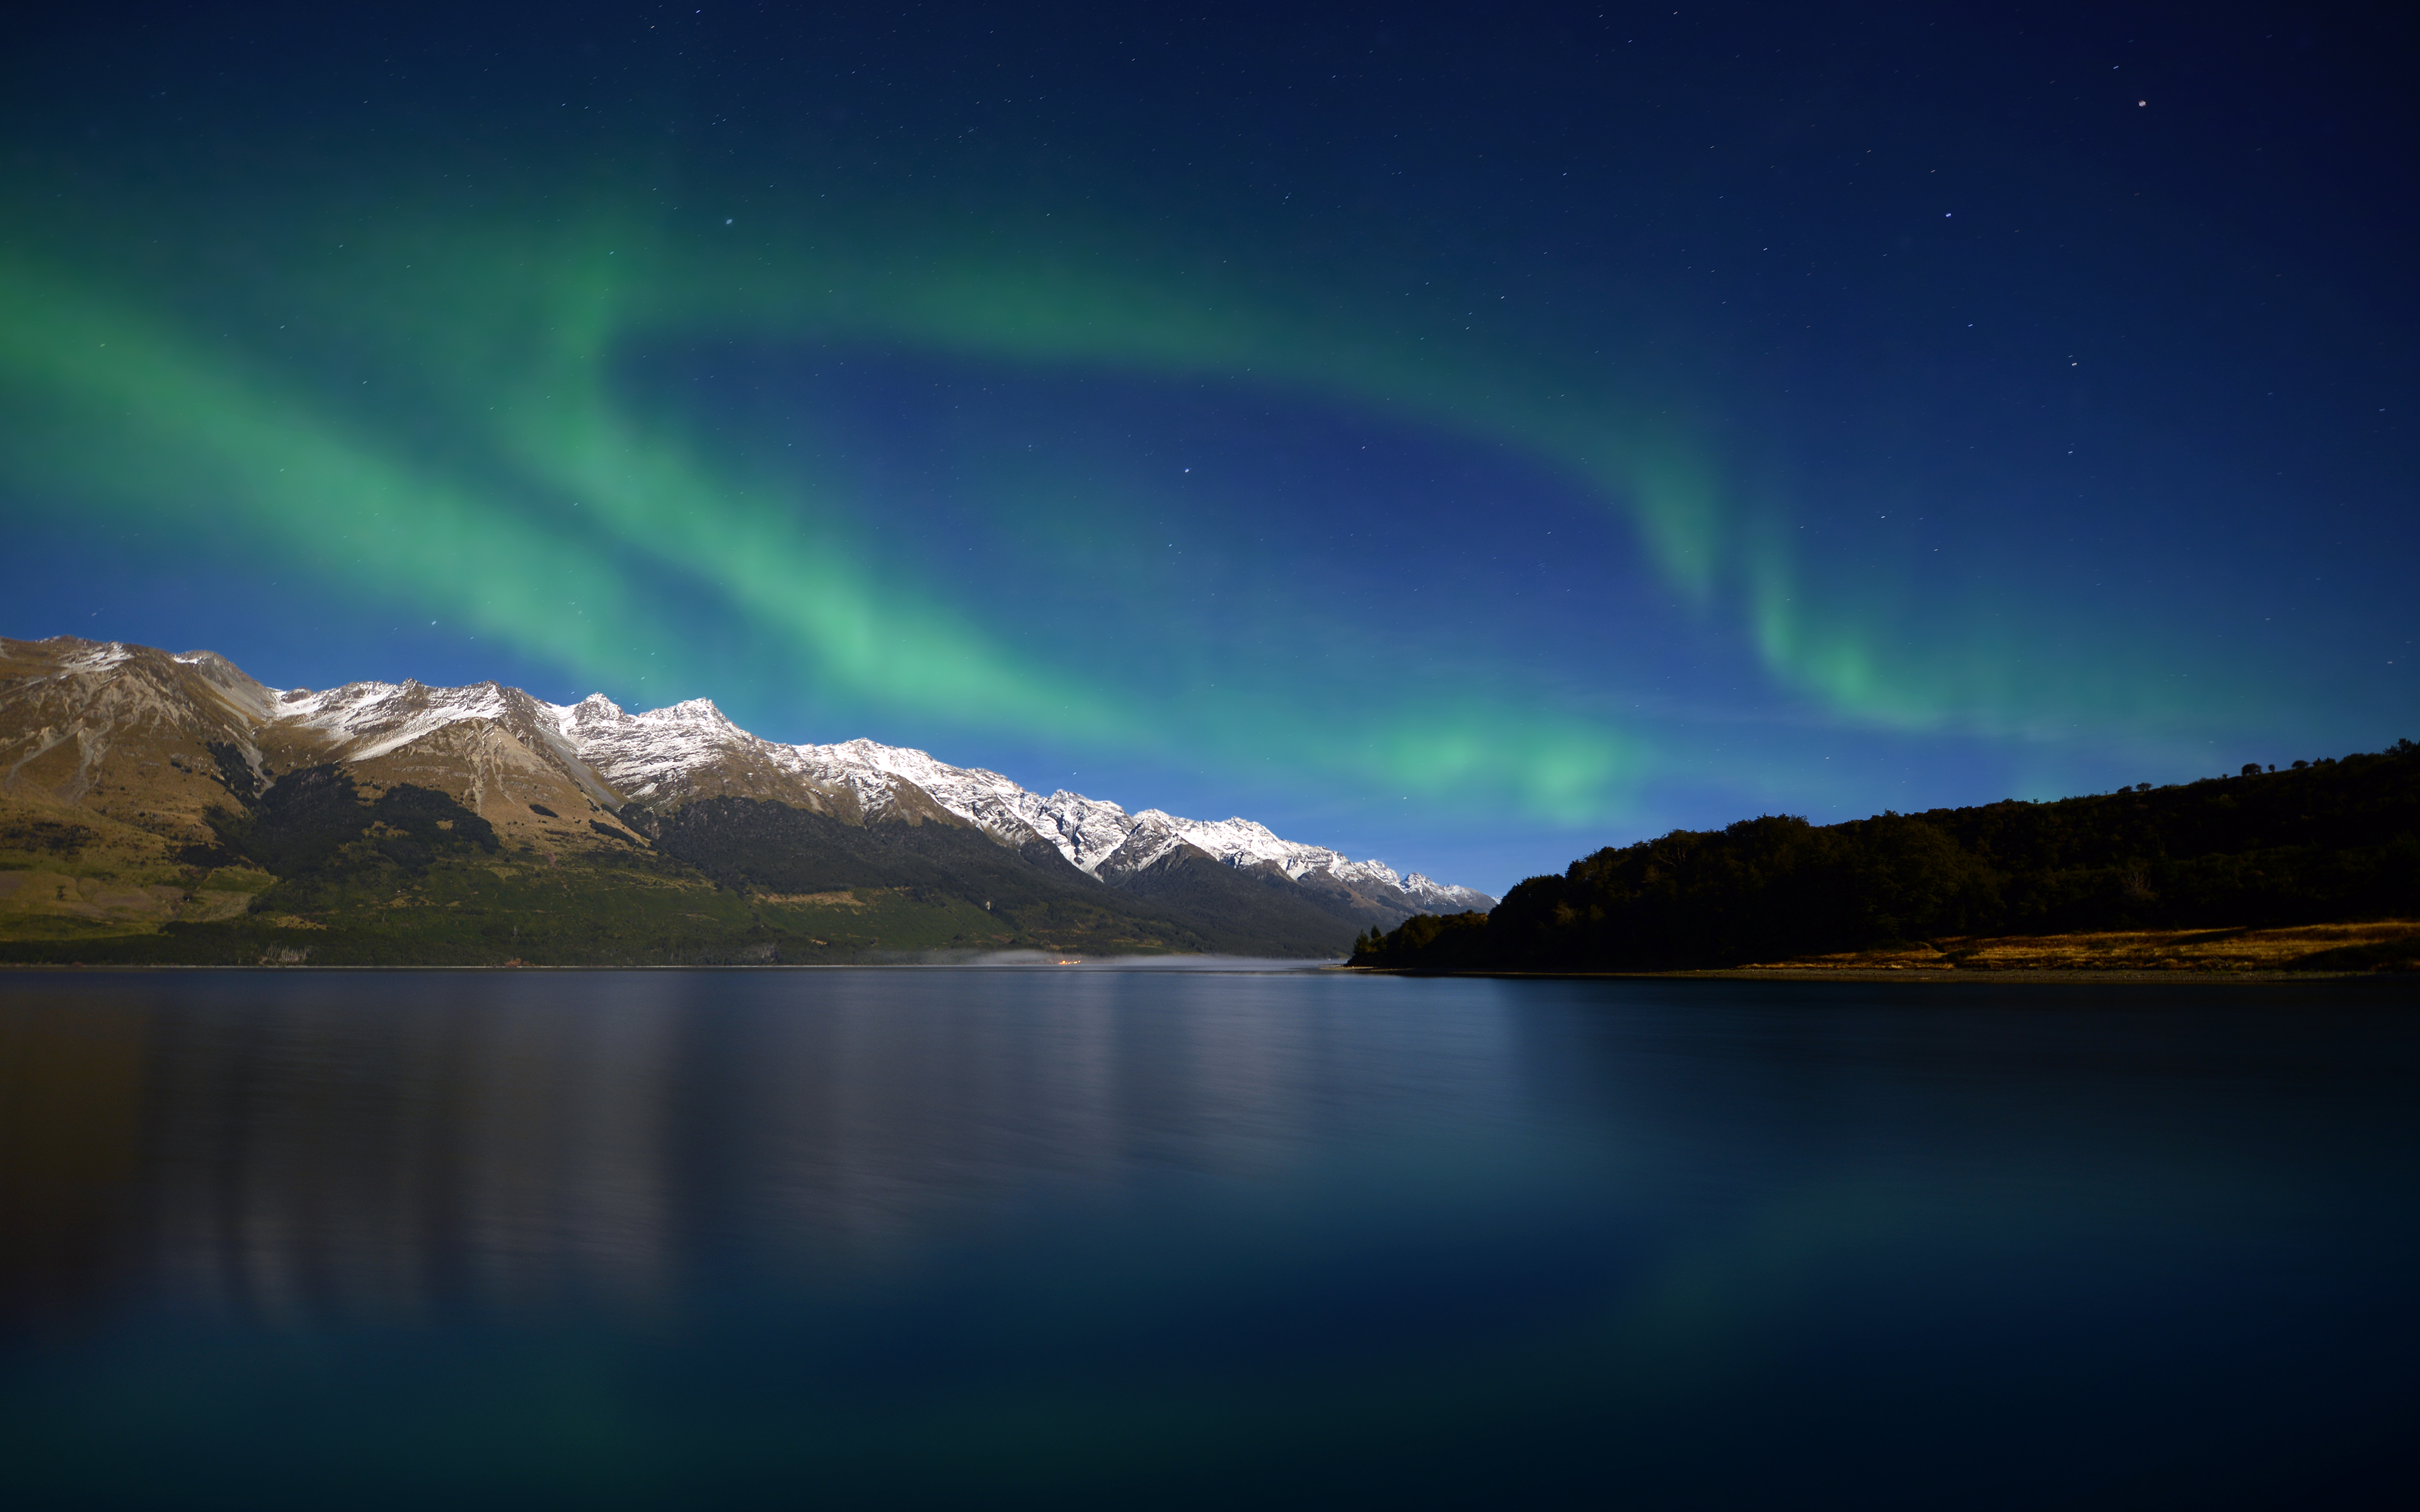 General 3840x2400 aurorae lake night nature snowy peak mountains New Zealand low light landscape clear sky